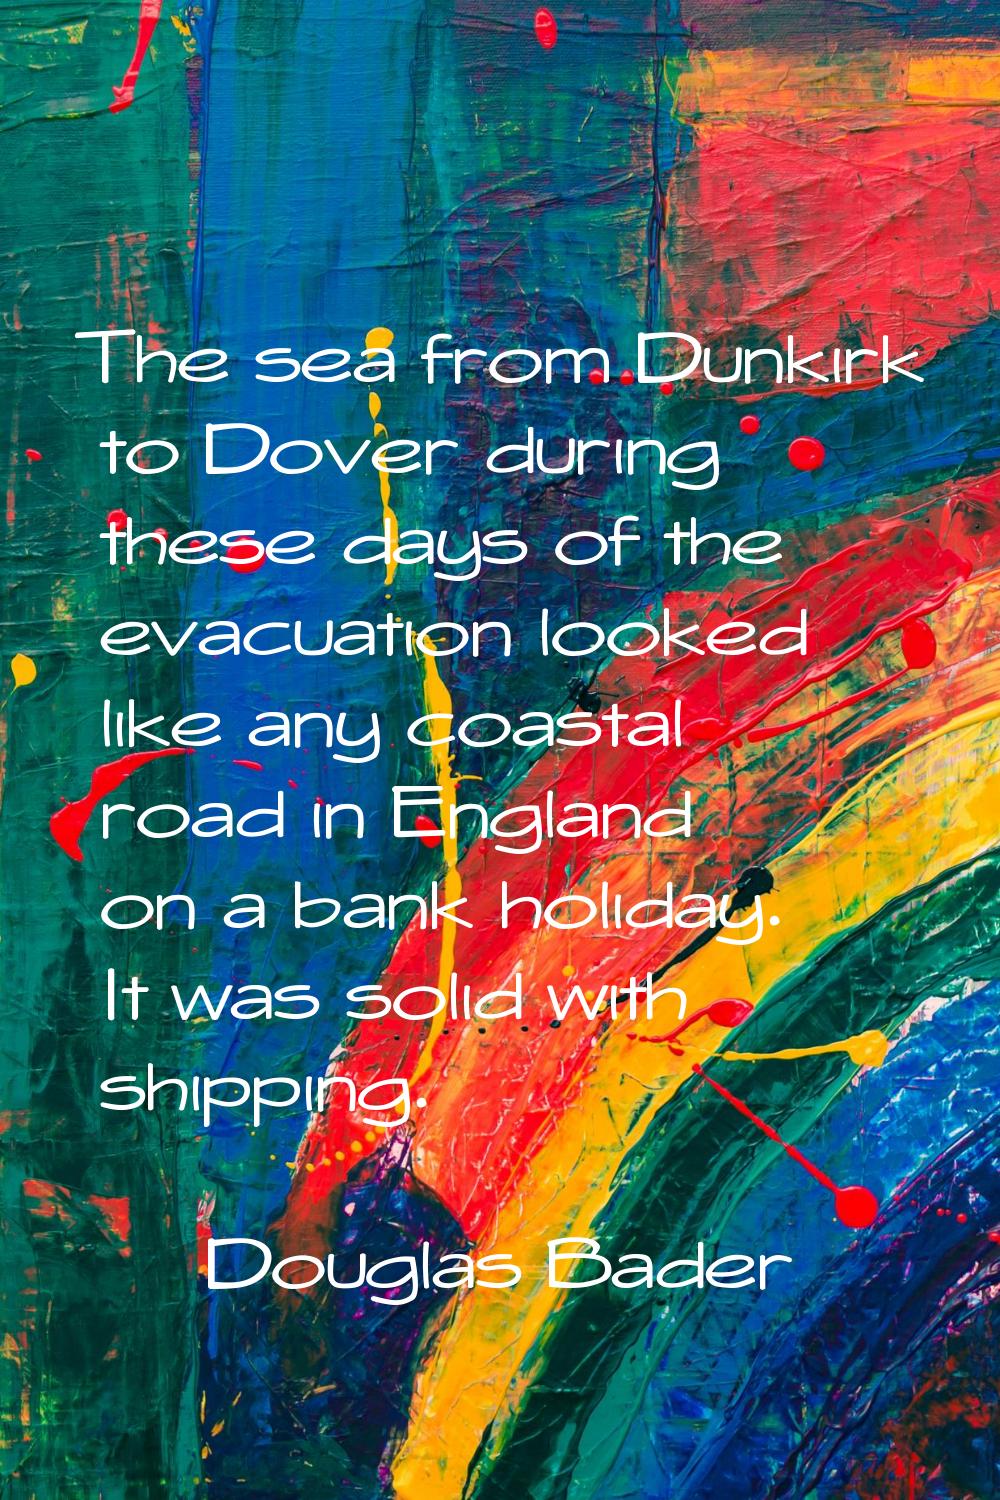 The sea from Dunkirk to Dover during these days of the evacuation looked like any coastal road in E